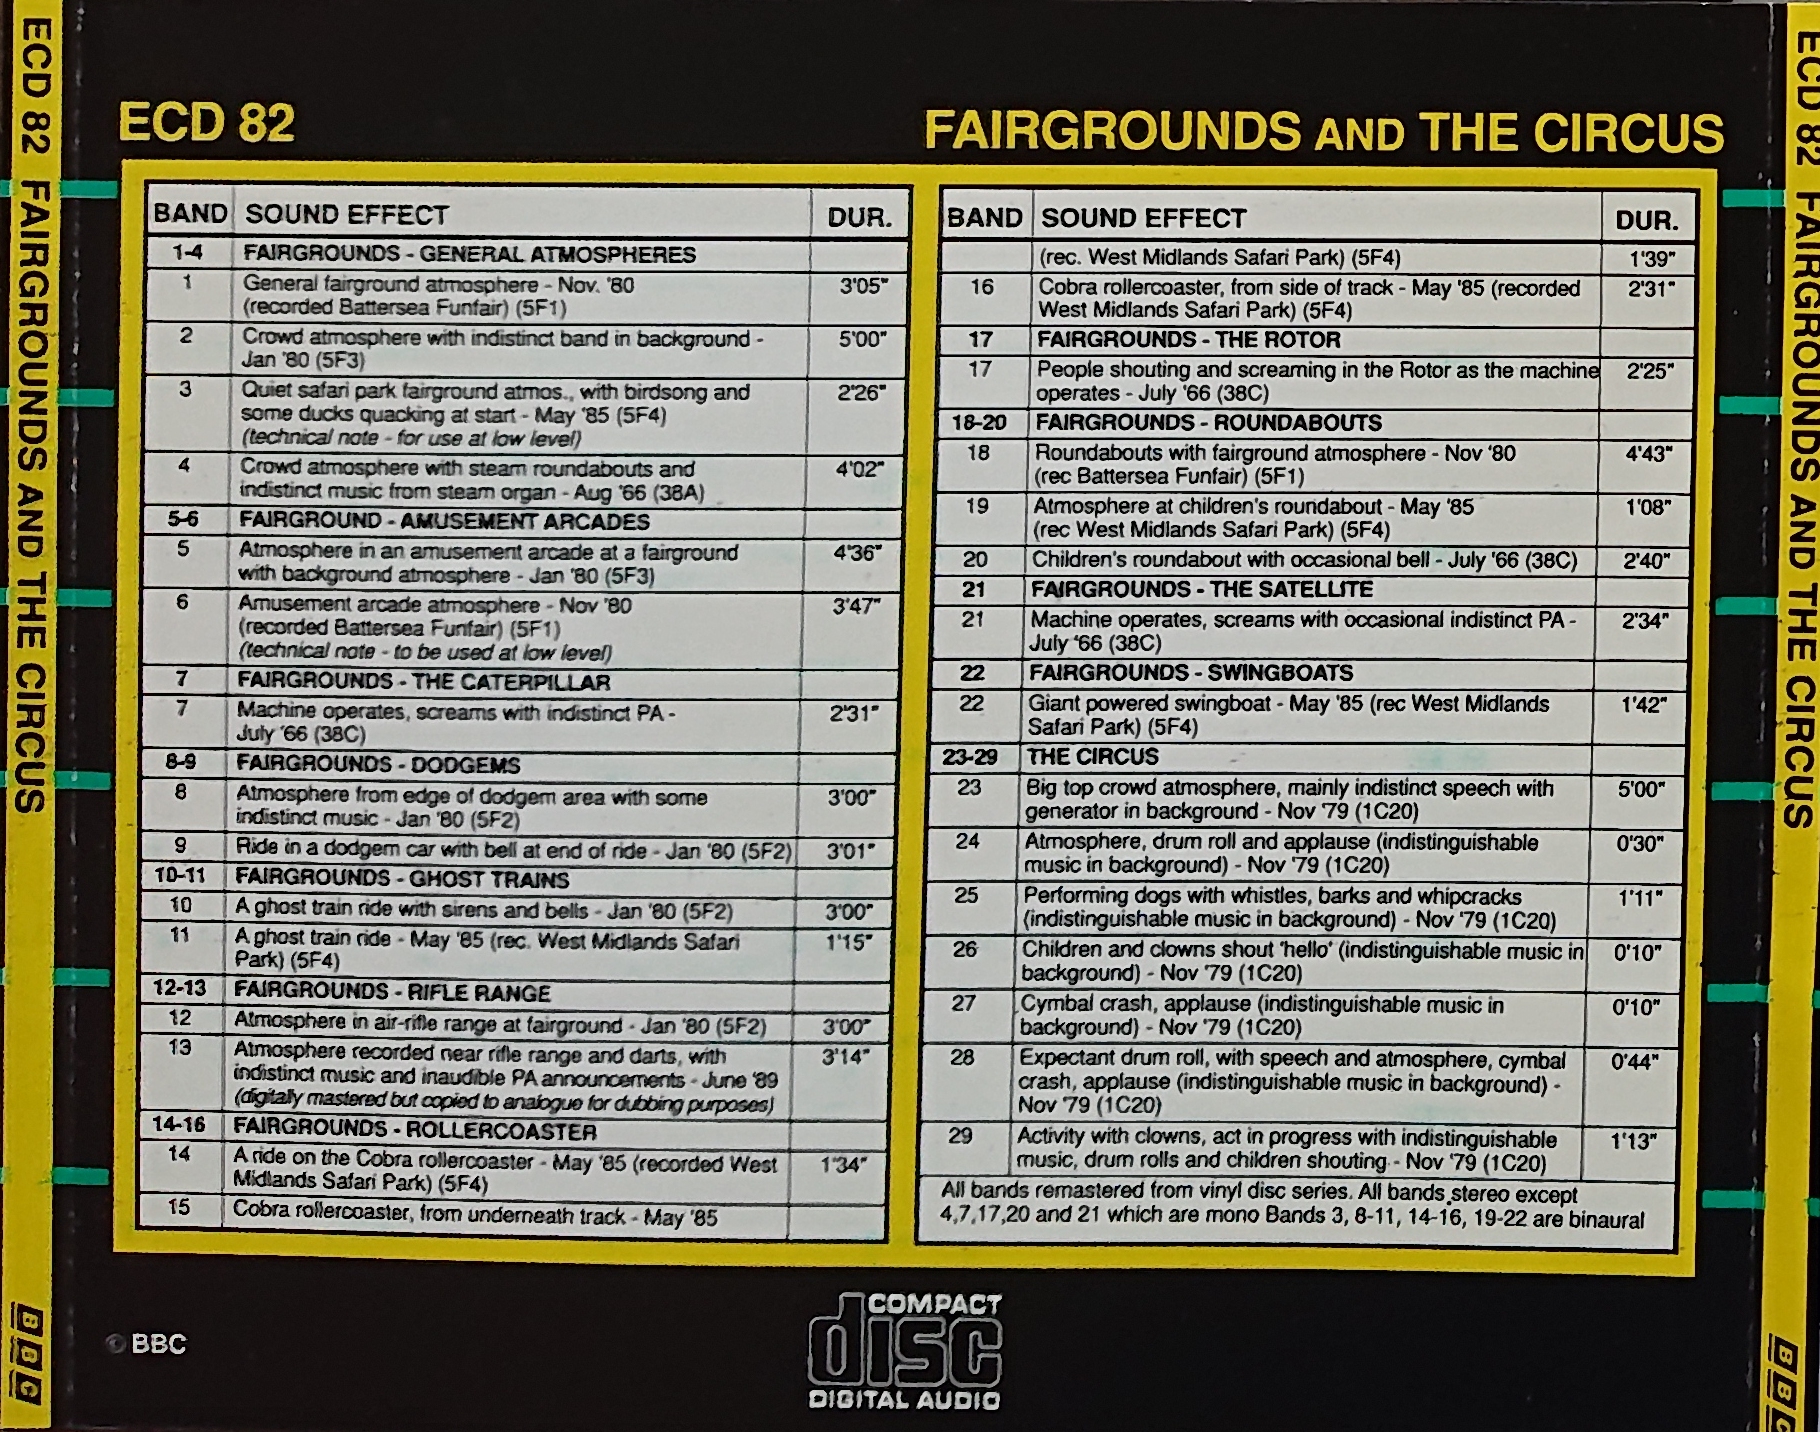 Picture of ECD 82 Fairgrounds and the circus by artist Various from the BBC records and Tapes library